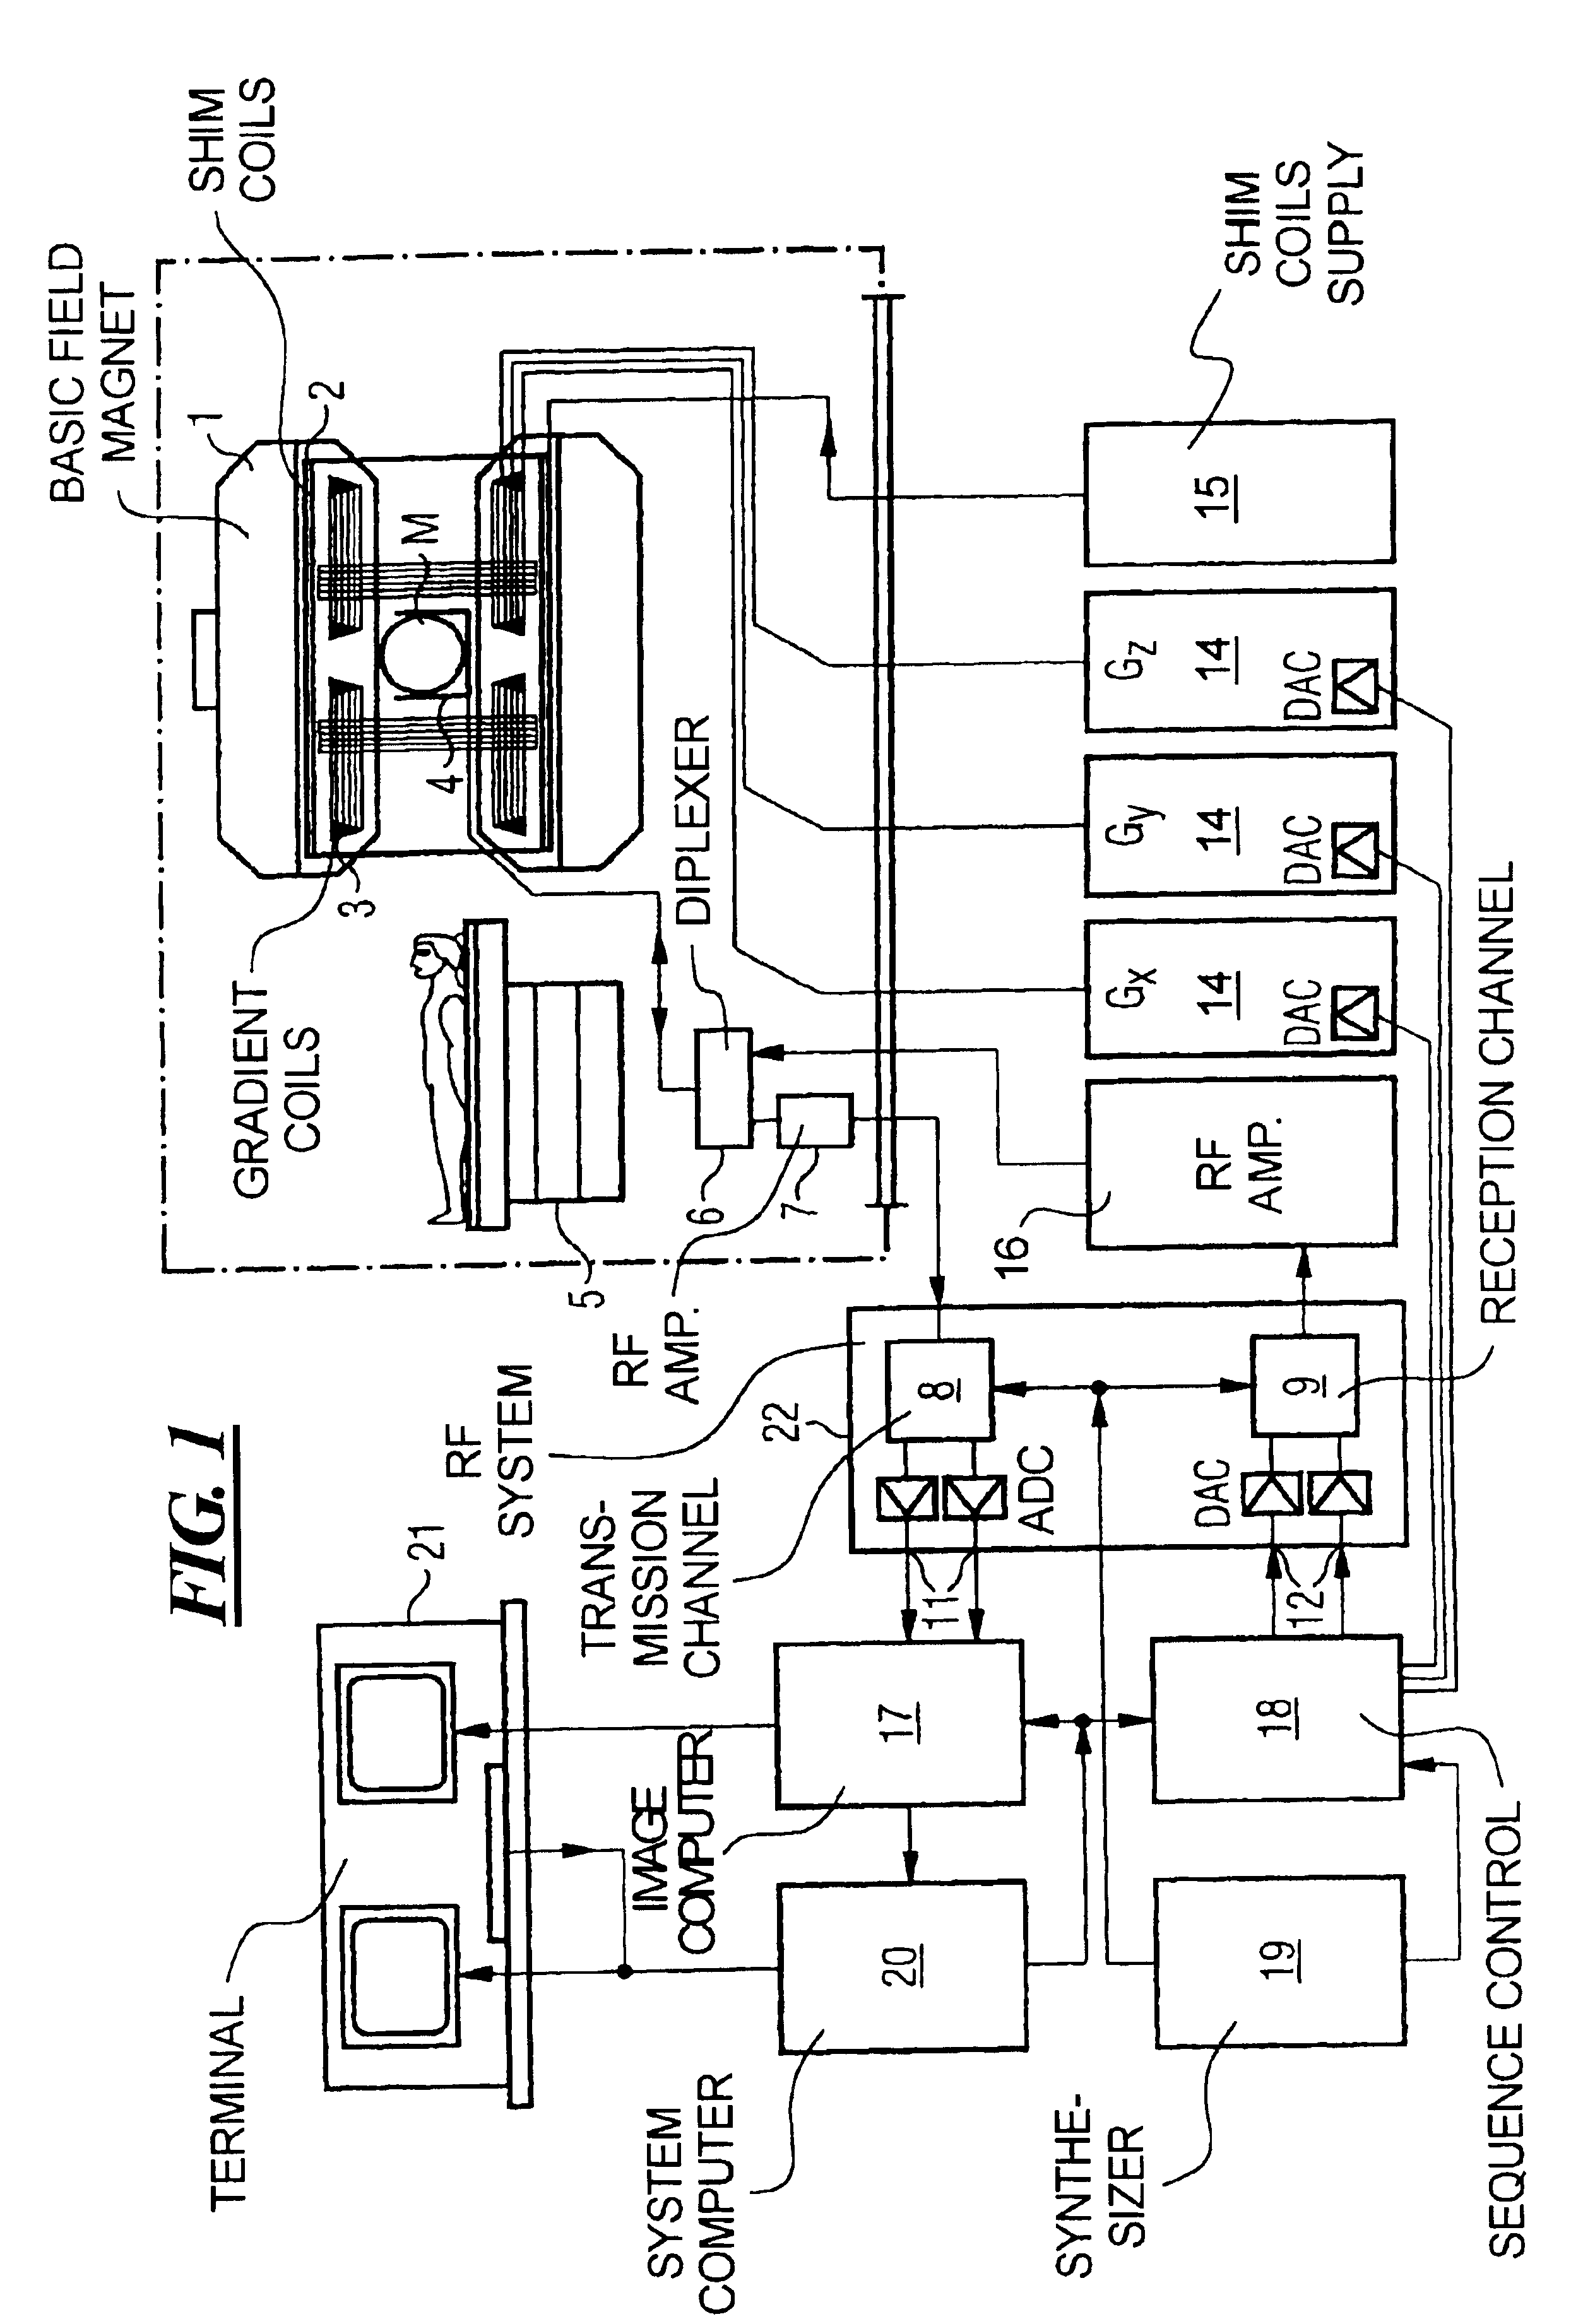 Magnetic resonance imaging method and apparatus employing partial parallel acquisition, wherein each coil produces a complete k-space datasheet